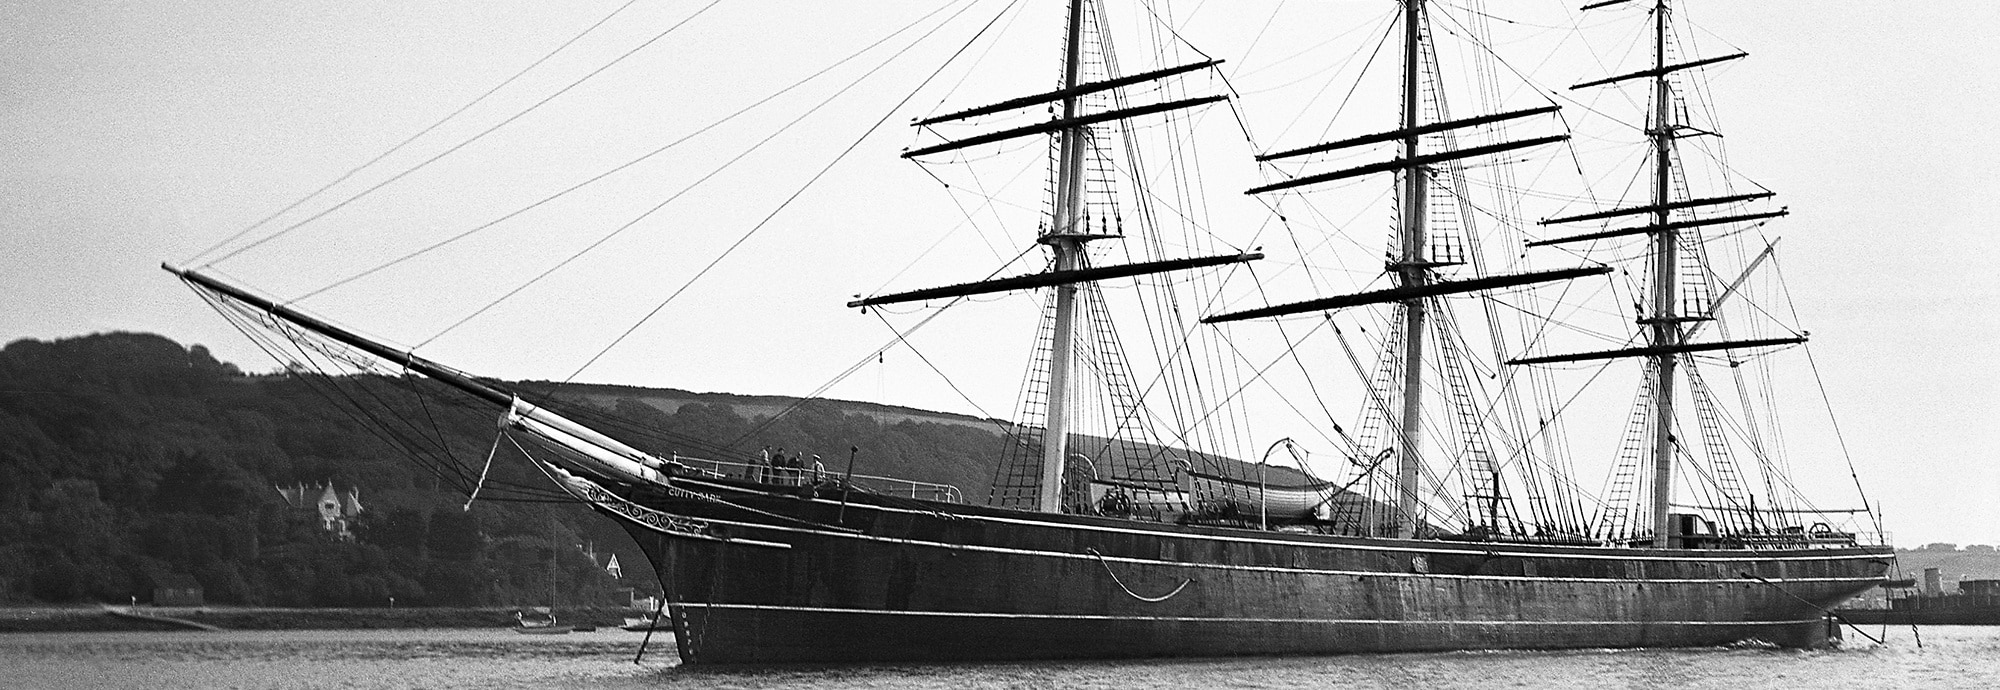 Black and white image of the Cutty Sark moored in Falmouth Harbour, taken side-on.